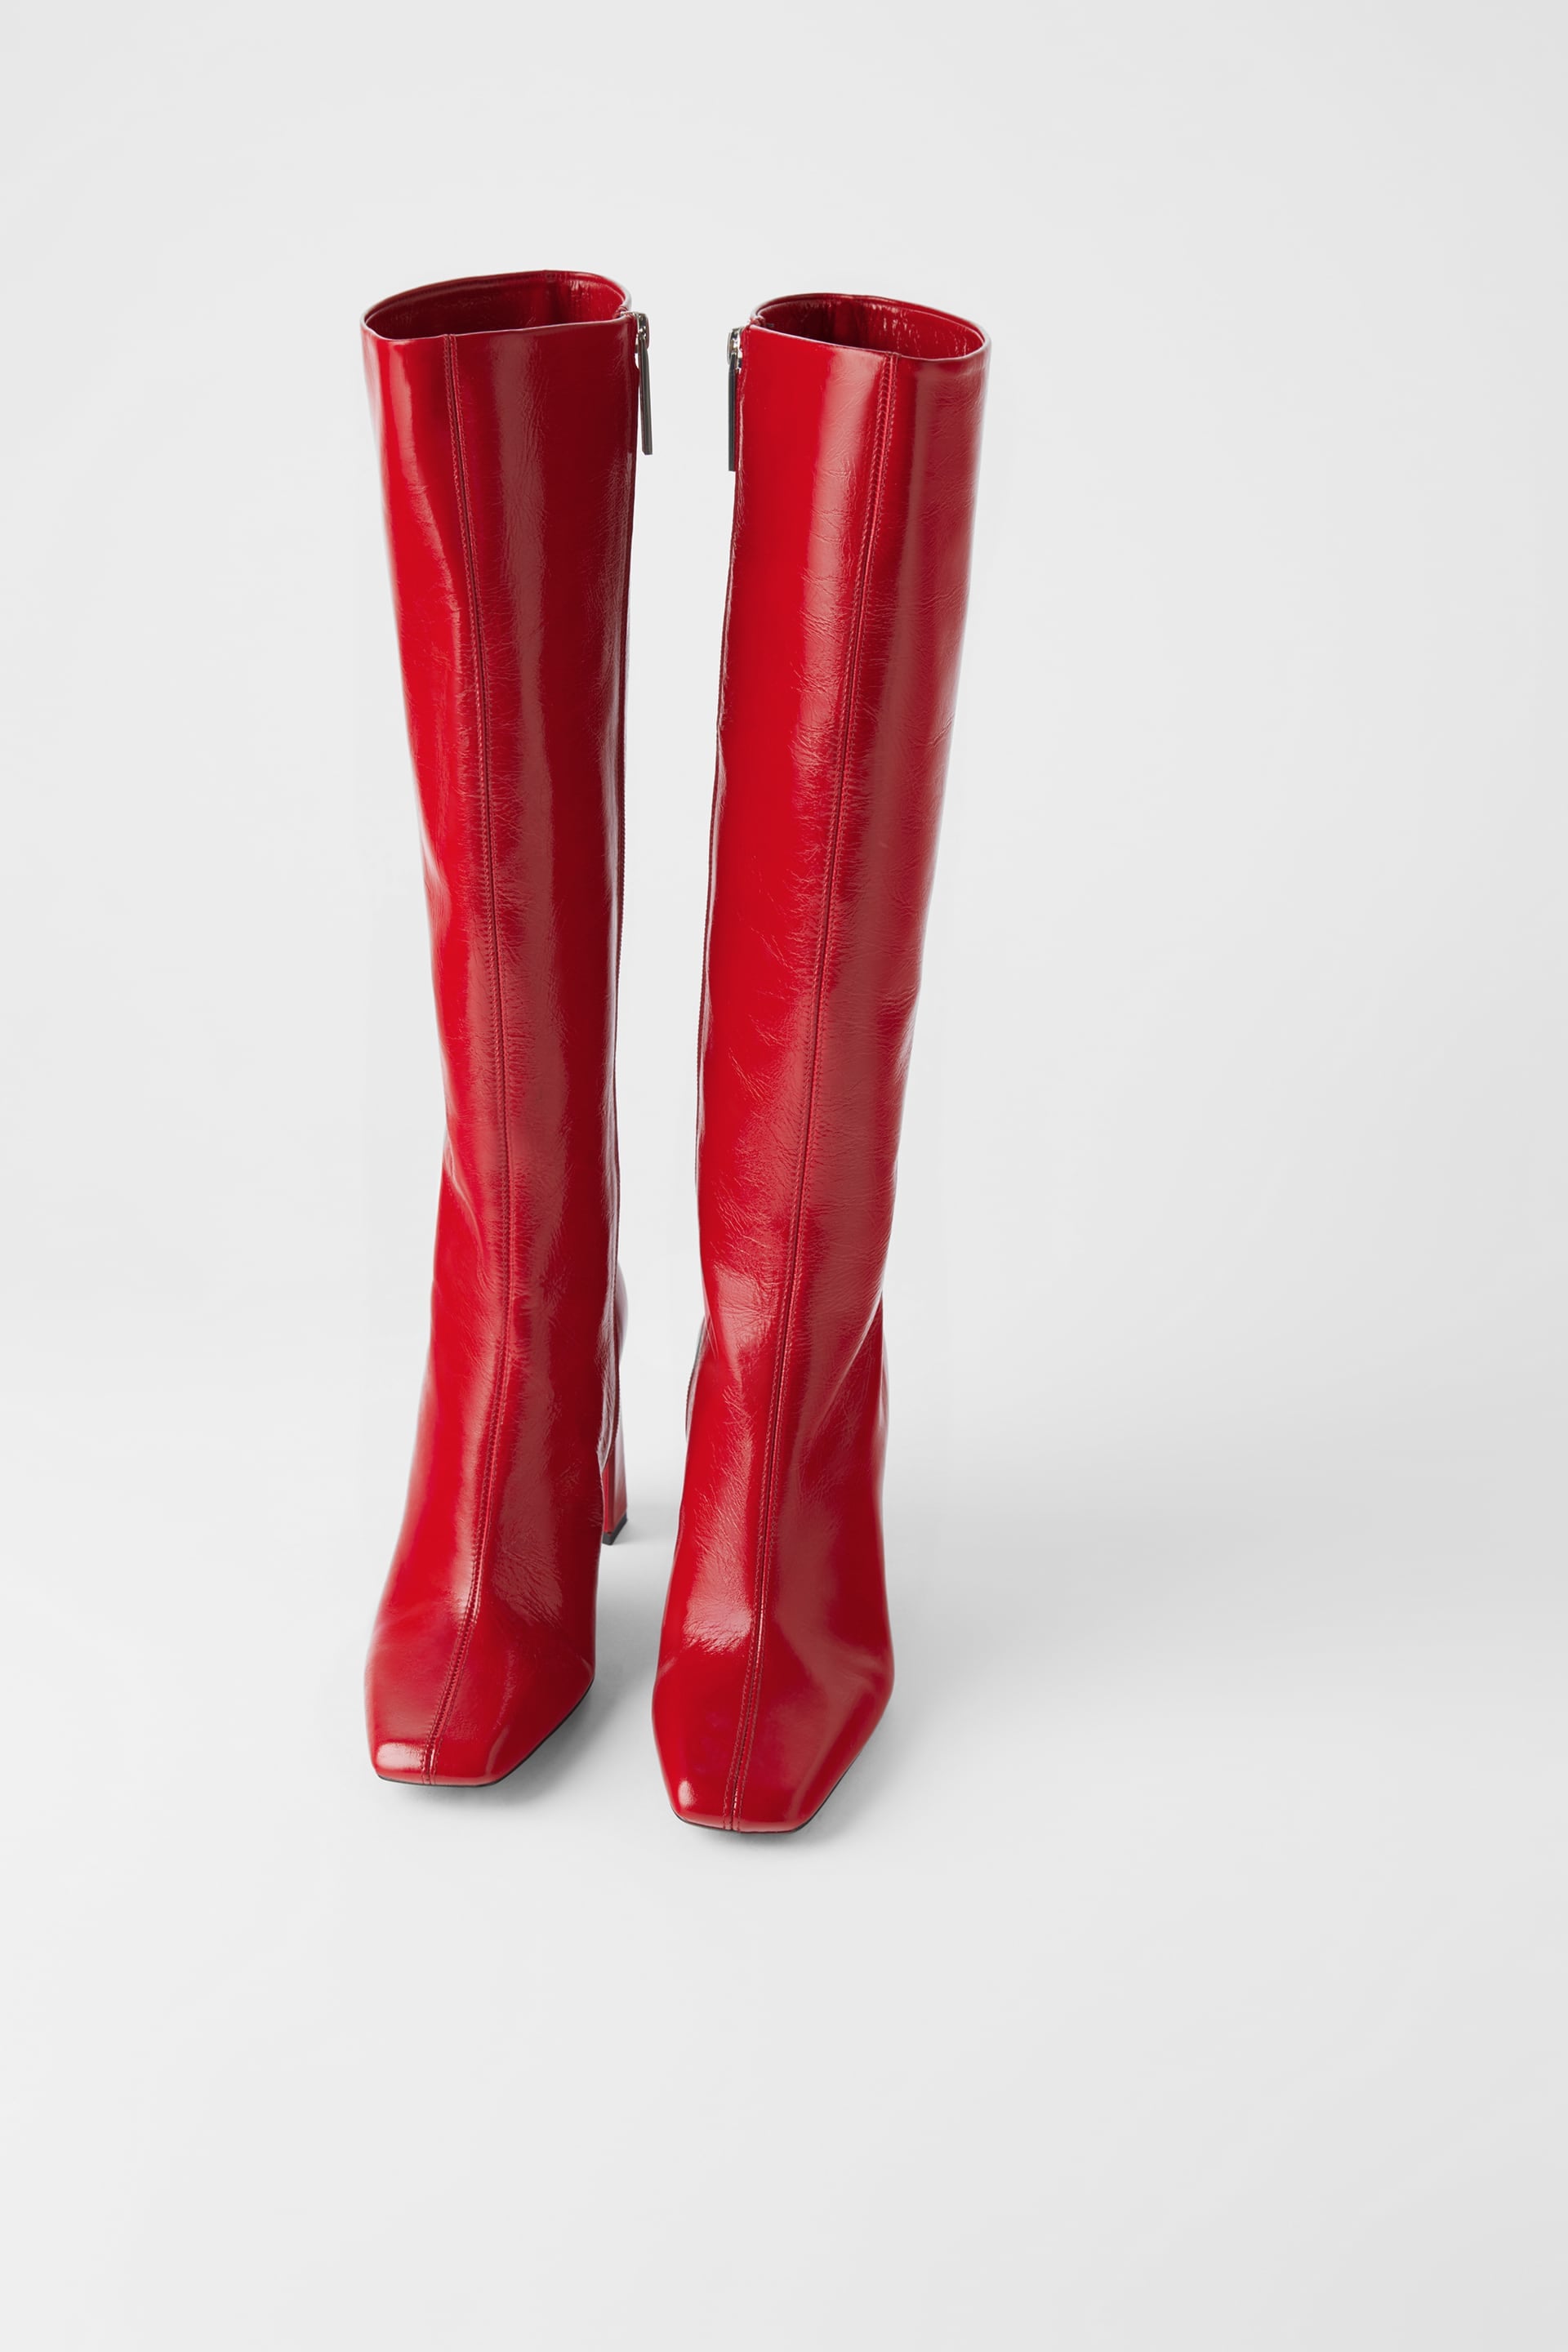 zara red leather boots